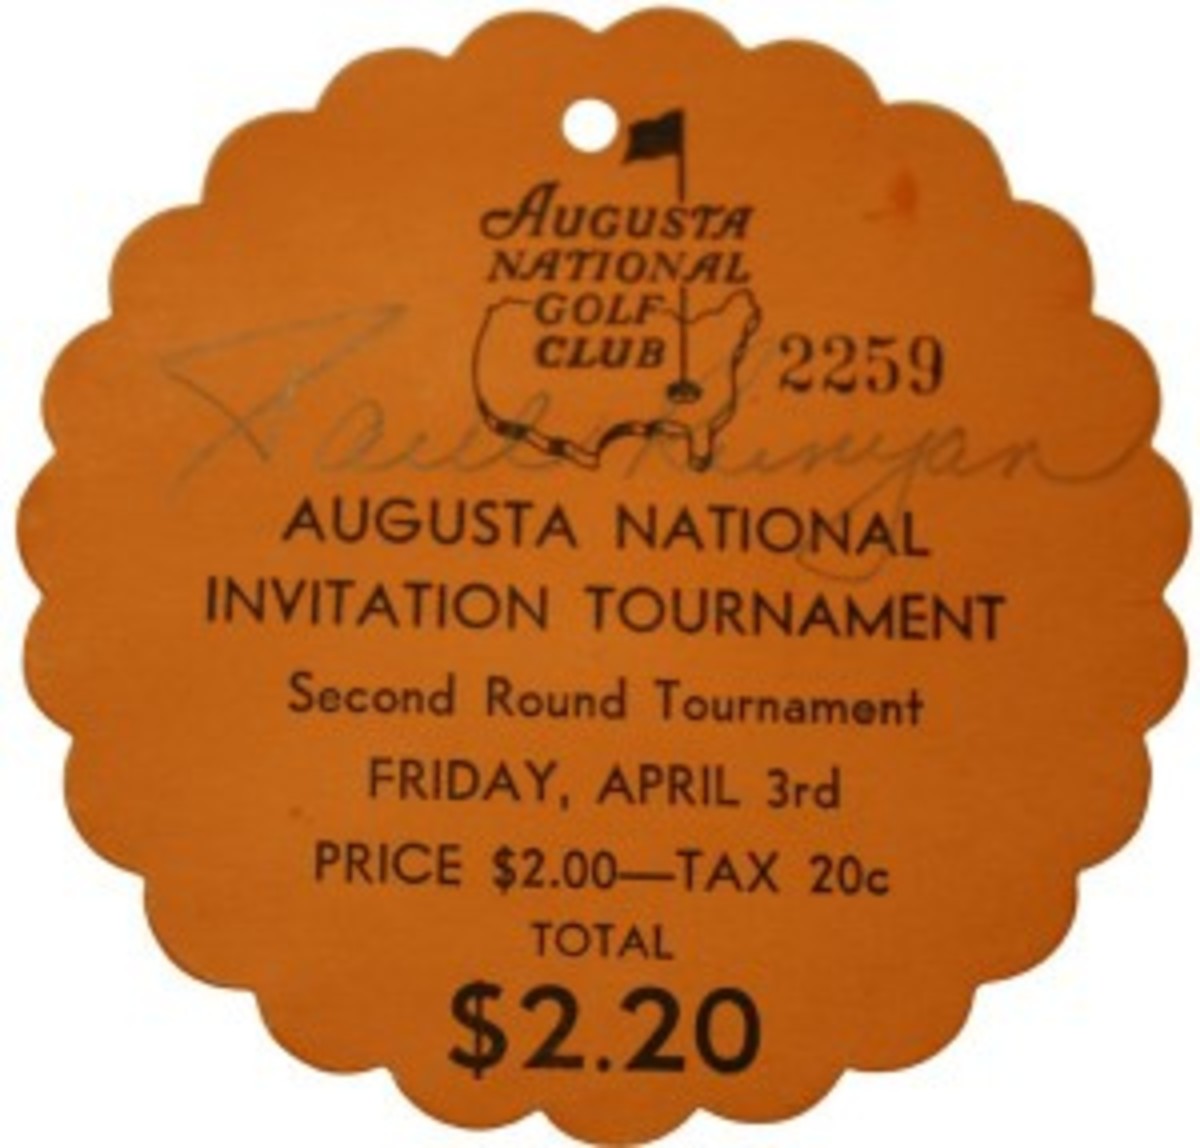 1936 Masters badge. This will be joined by a 1936 program/pairings sheet that has never come to auction.